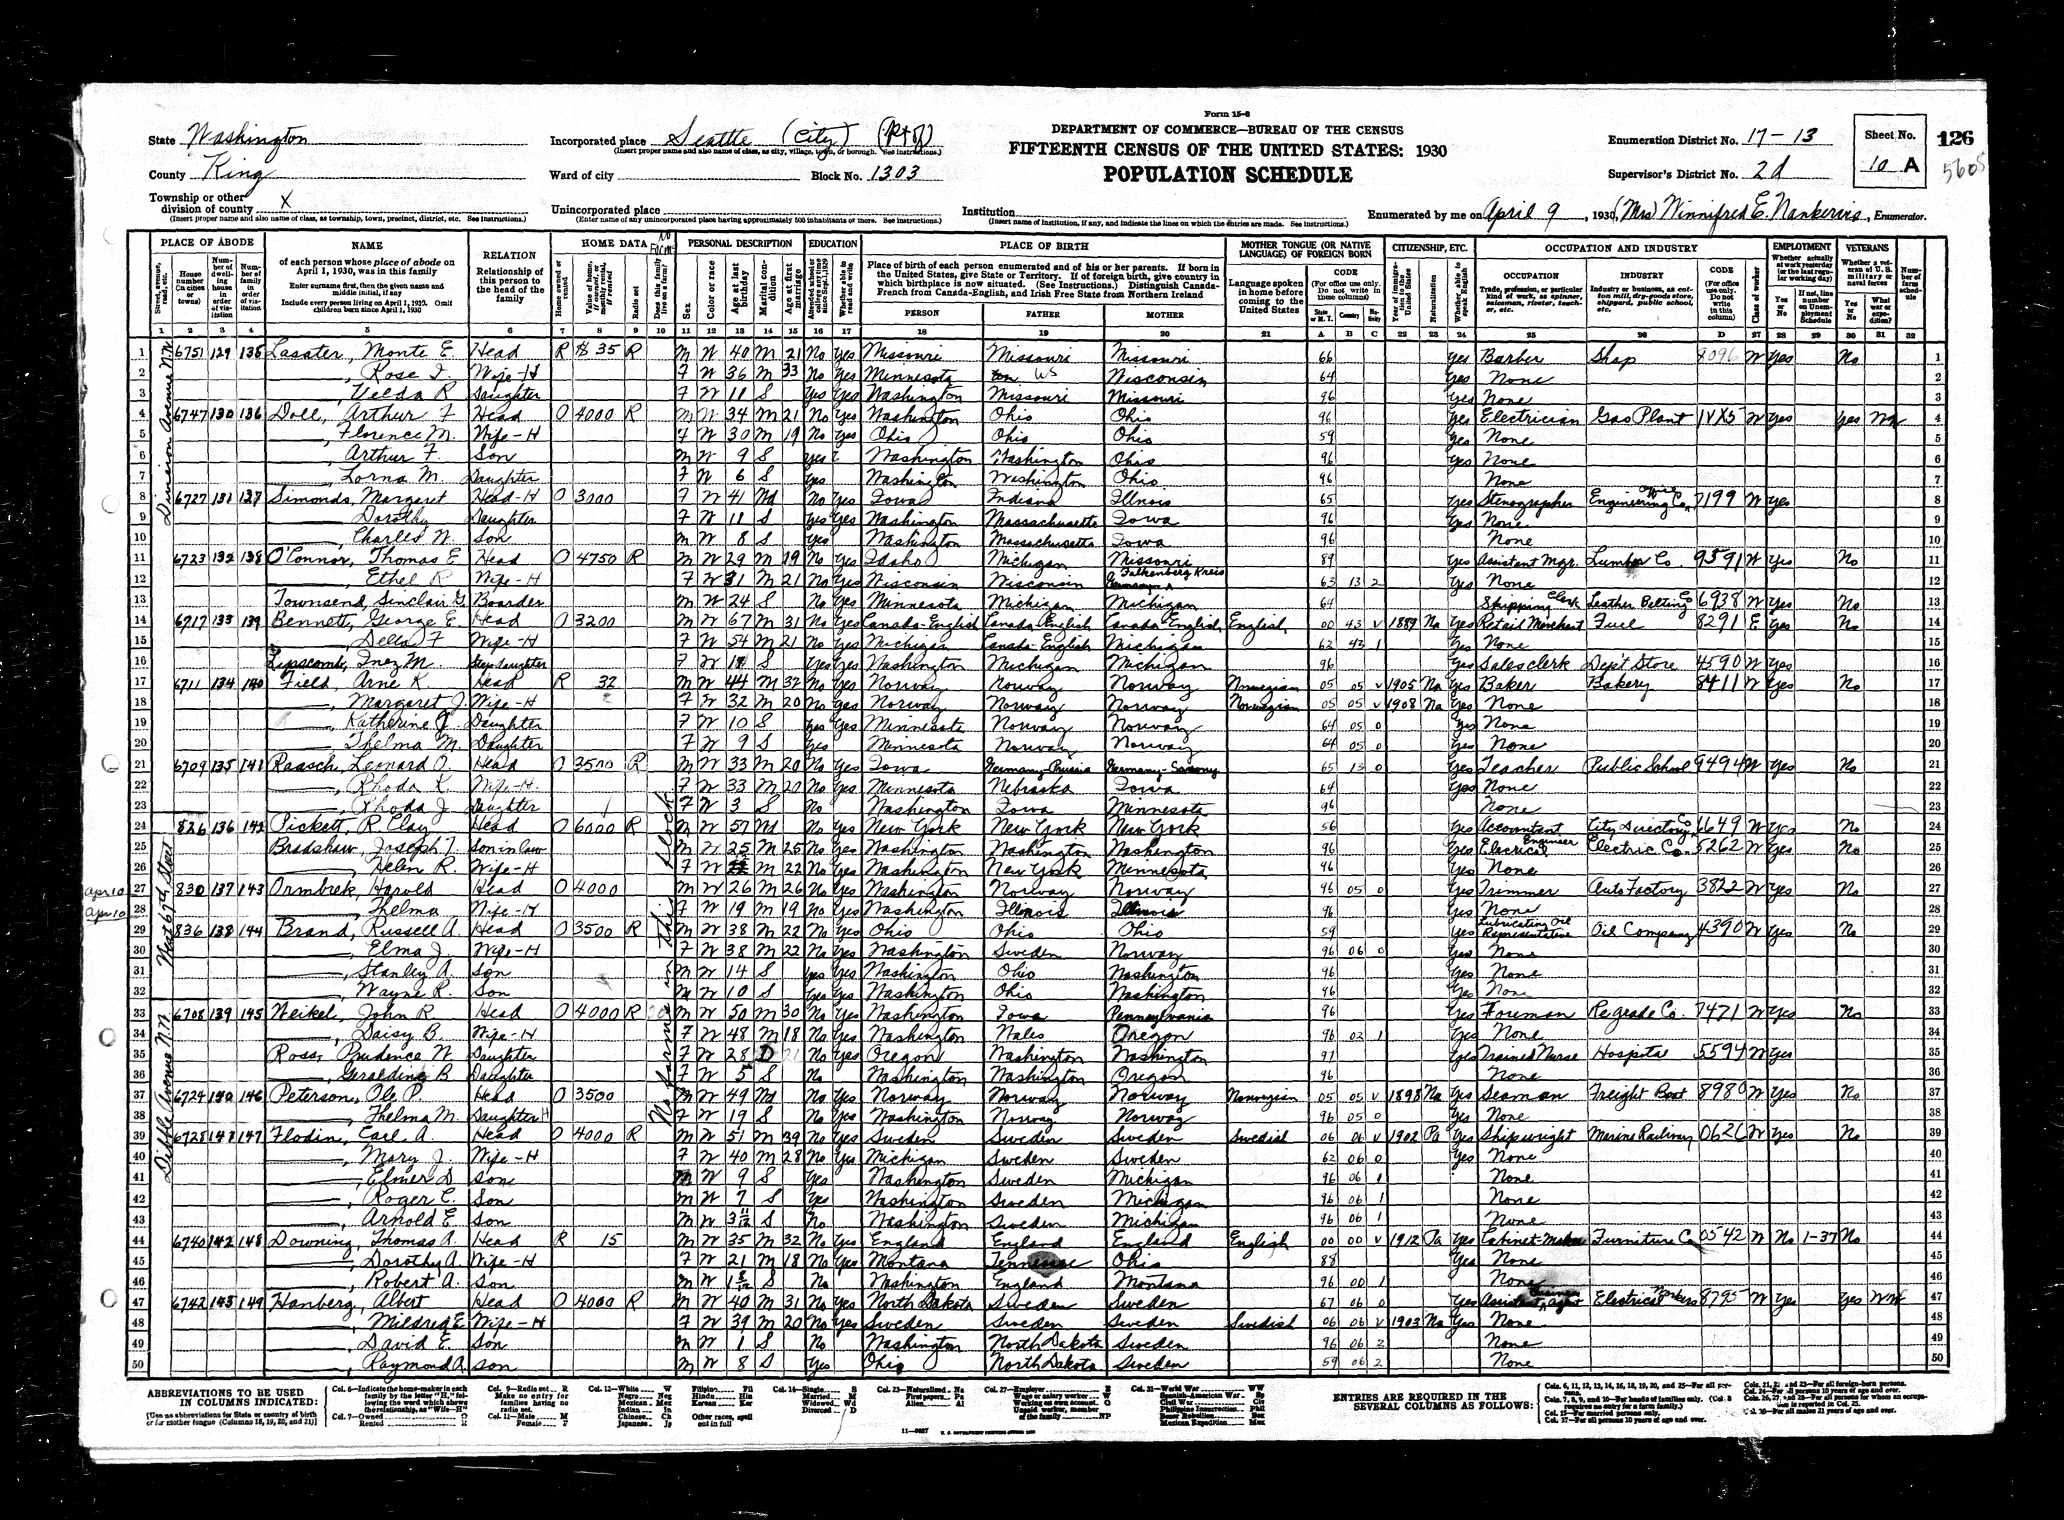 Monty E. Lasater and second wife, Rose, 1930 King County, Washington, census